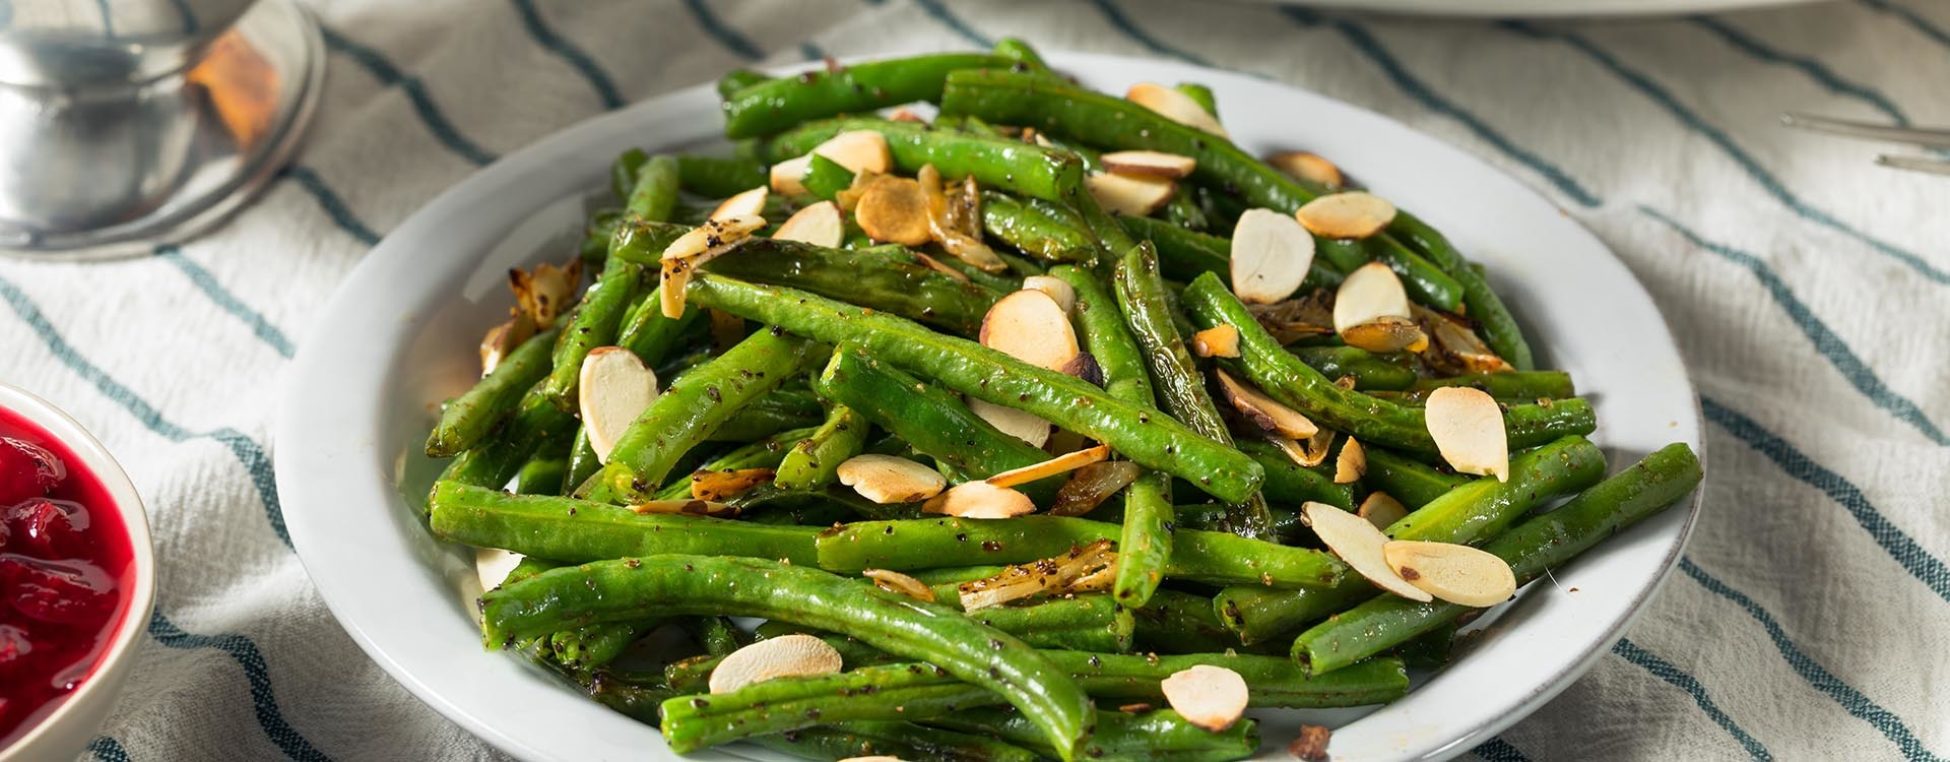 https://www.supermarche-match.be/uploads/recipes/images/_header/Haricots-verts-amandes-ail.jpg